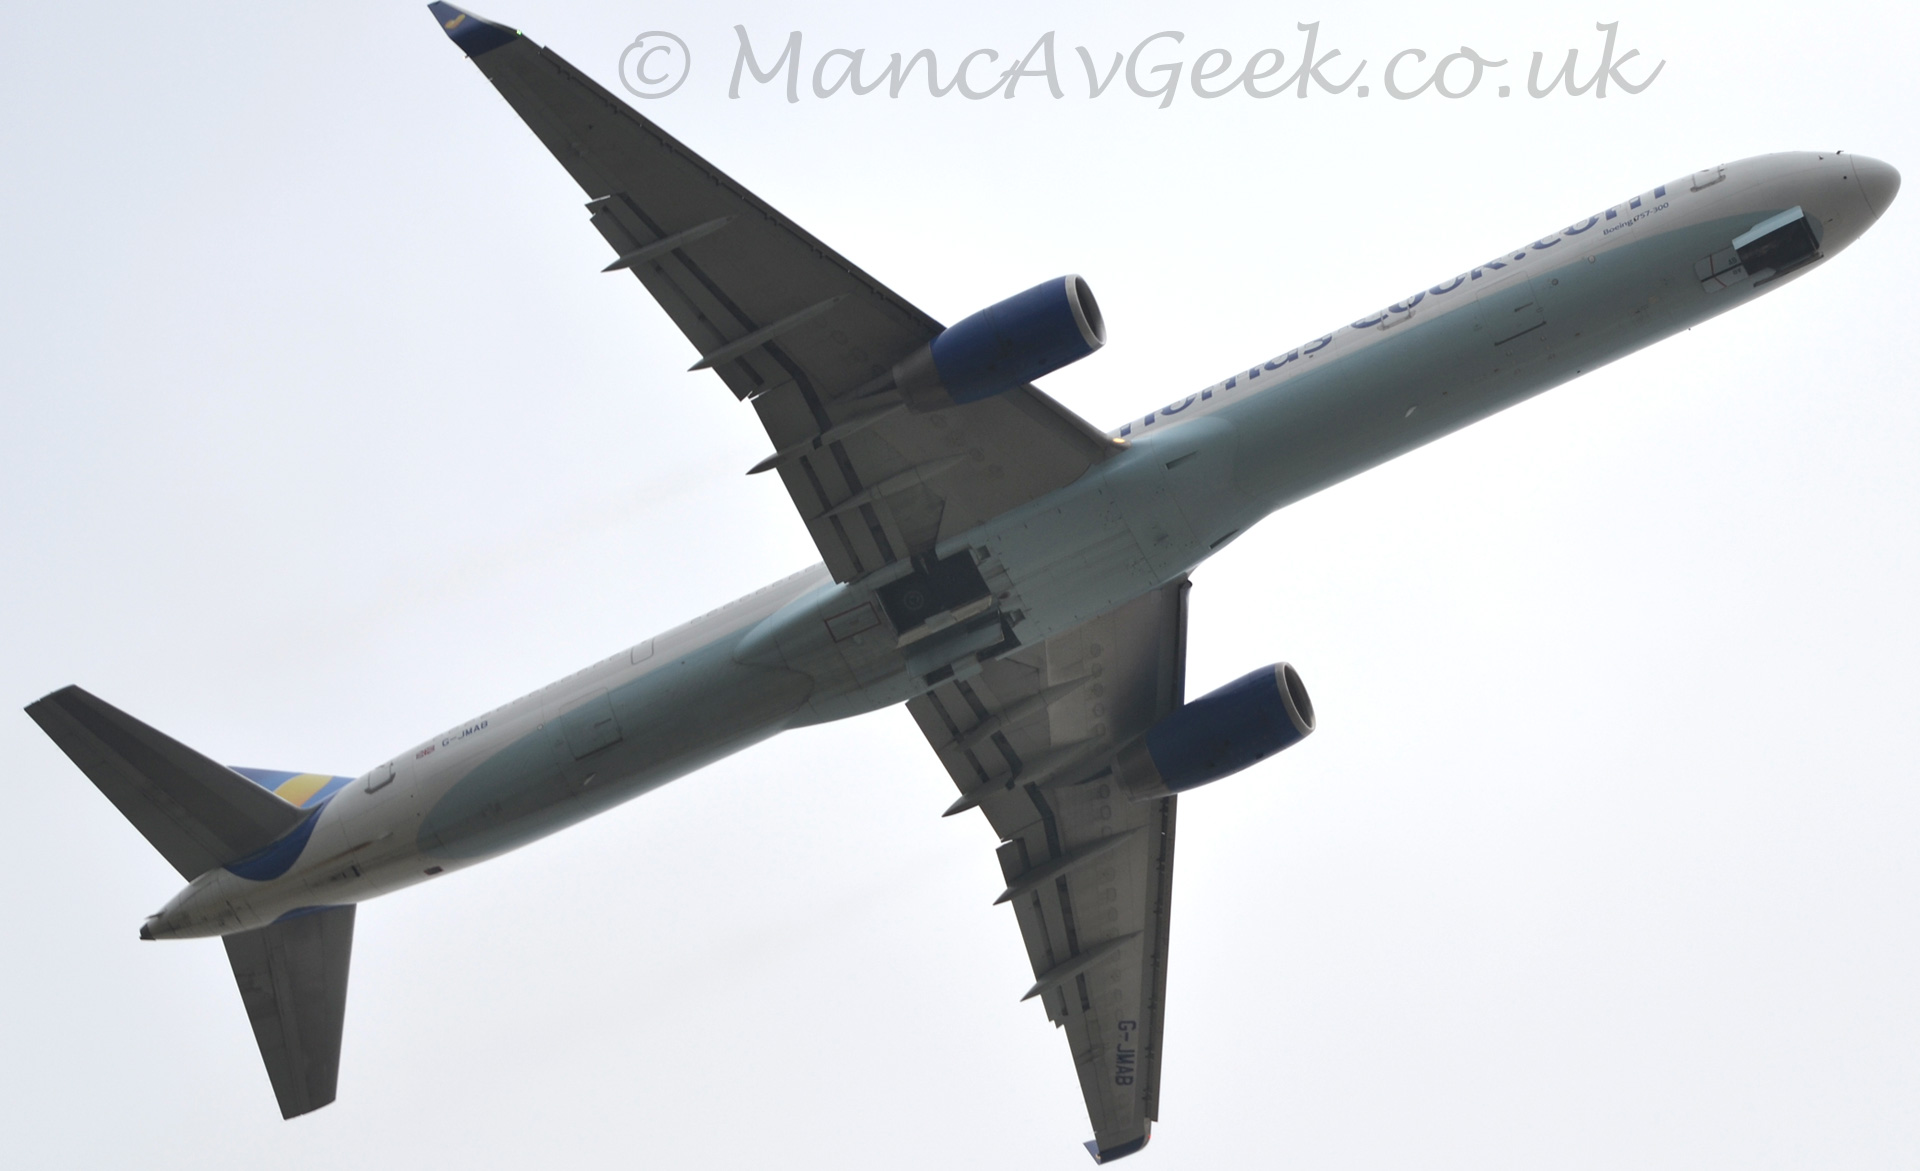 View from almost directly below of a twin engined jet airliner flying from left to right at low level, with the landing gear being stowed, and flaps deployed from the rear of the wings. The plane is mostly white, with a duck-egg blue belly, and large dark blue "Thomas Cook.com" on the forward fuselage. The tail is blue, with a yellow splodge. The sky behind it is a flat grey.